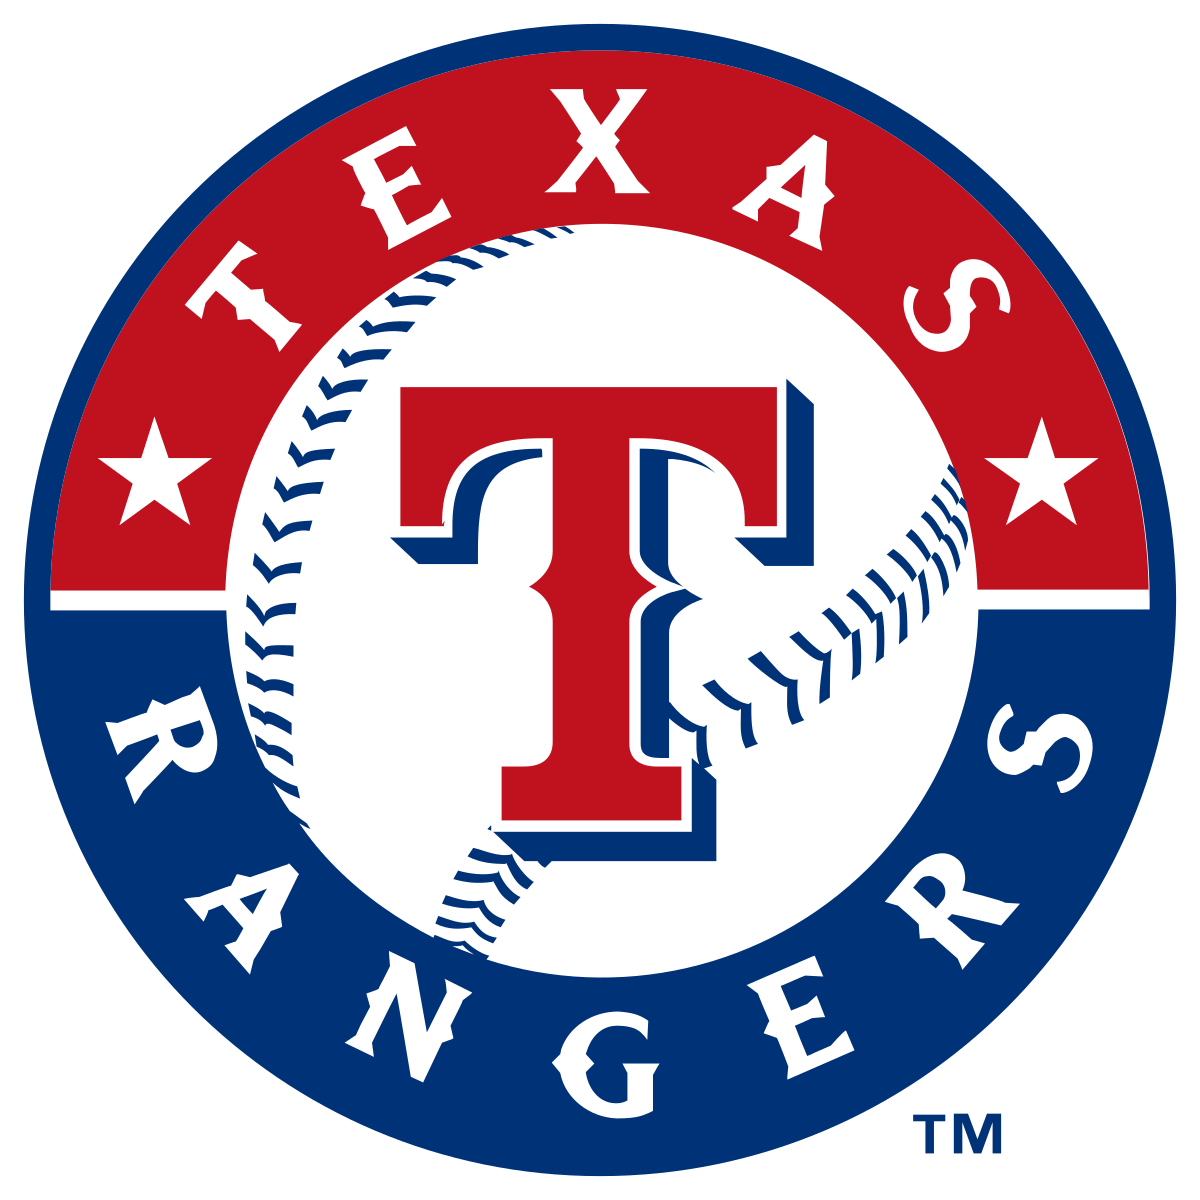 Presale Codes to purchase tickets for Texas Rangers Postseason 2023